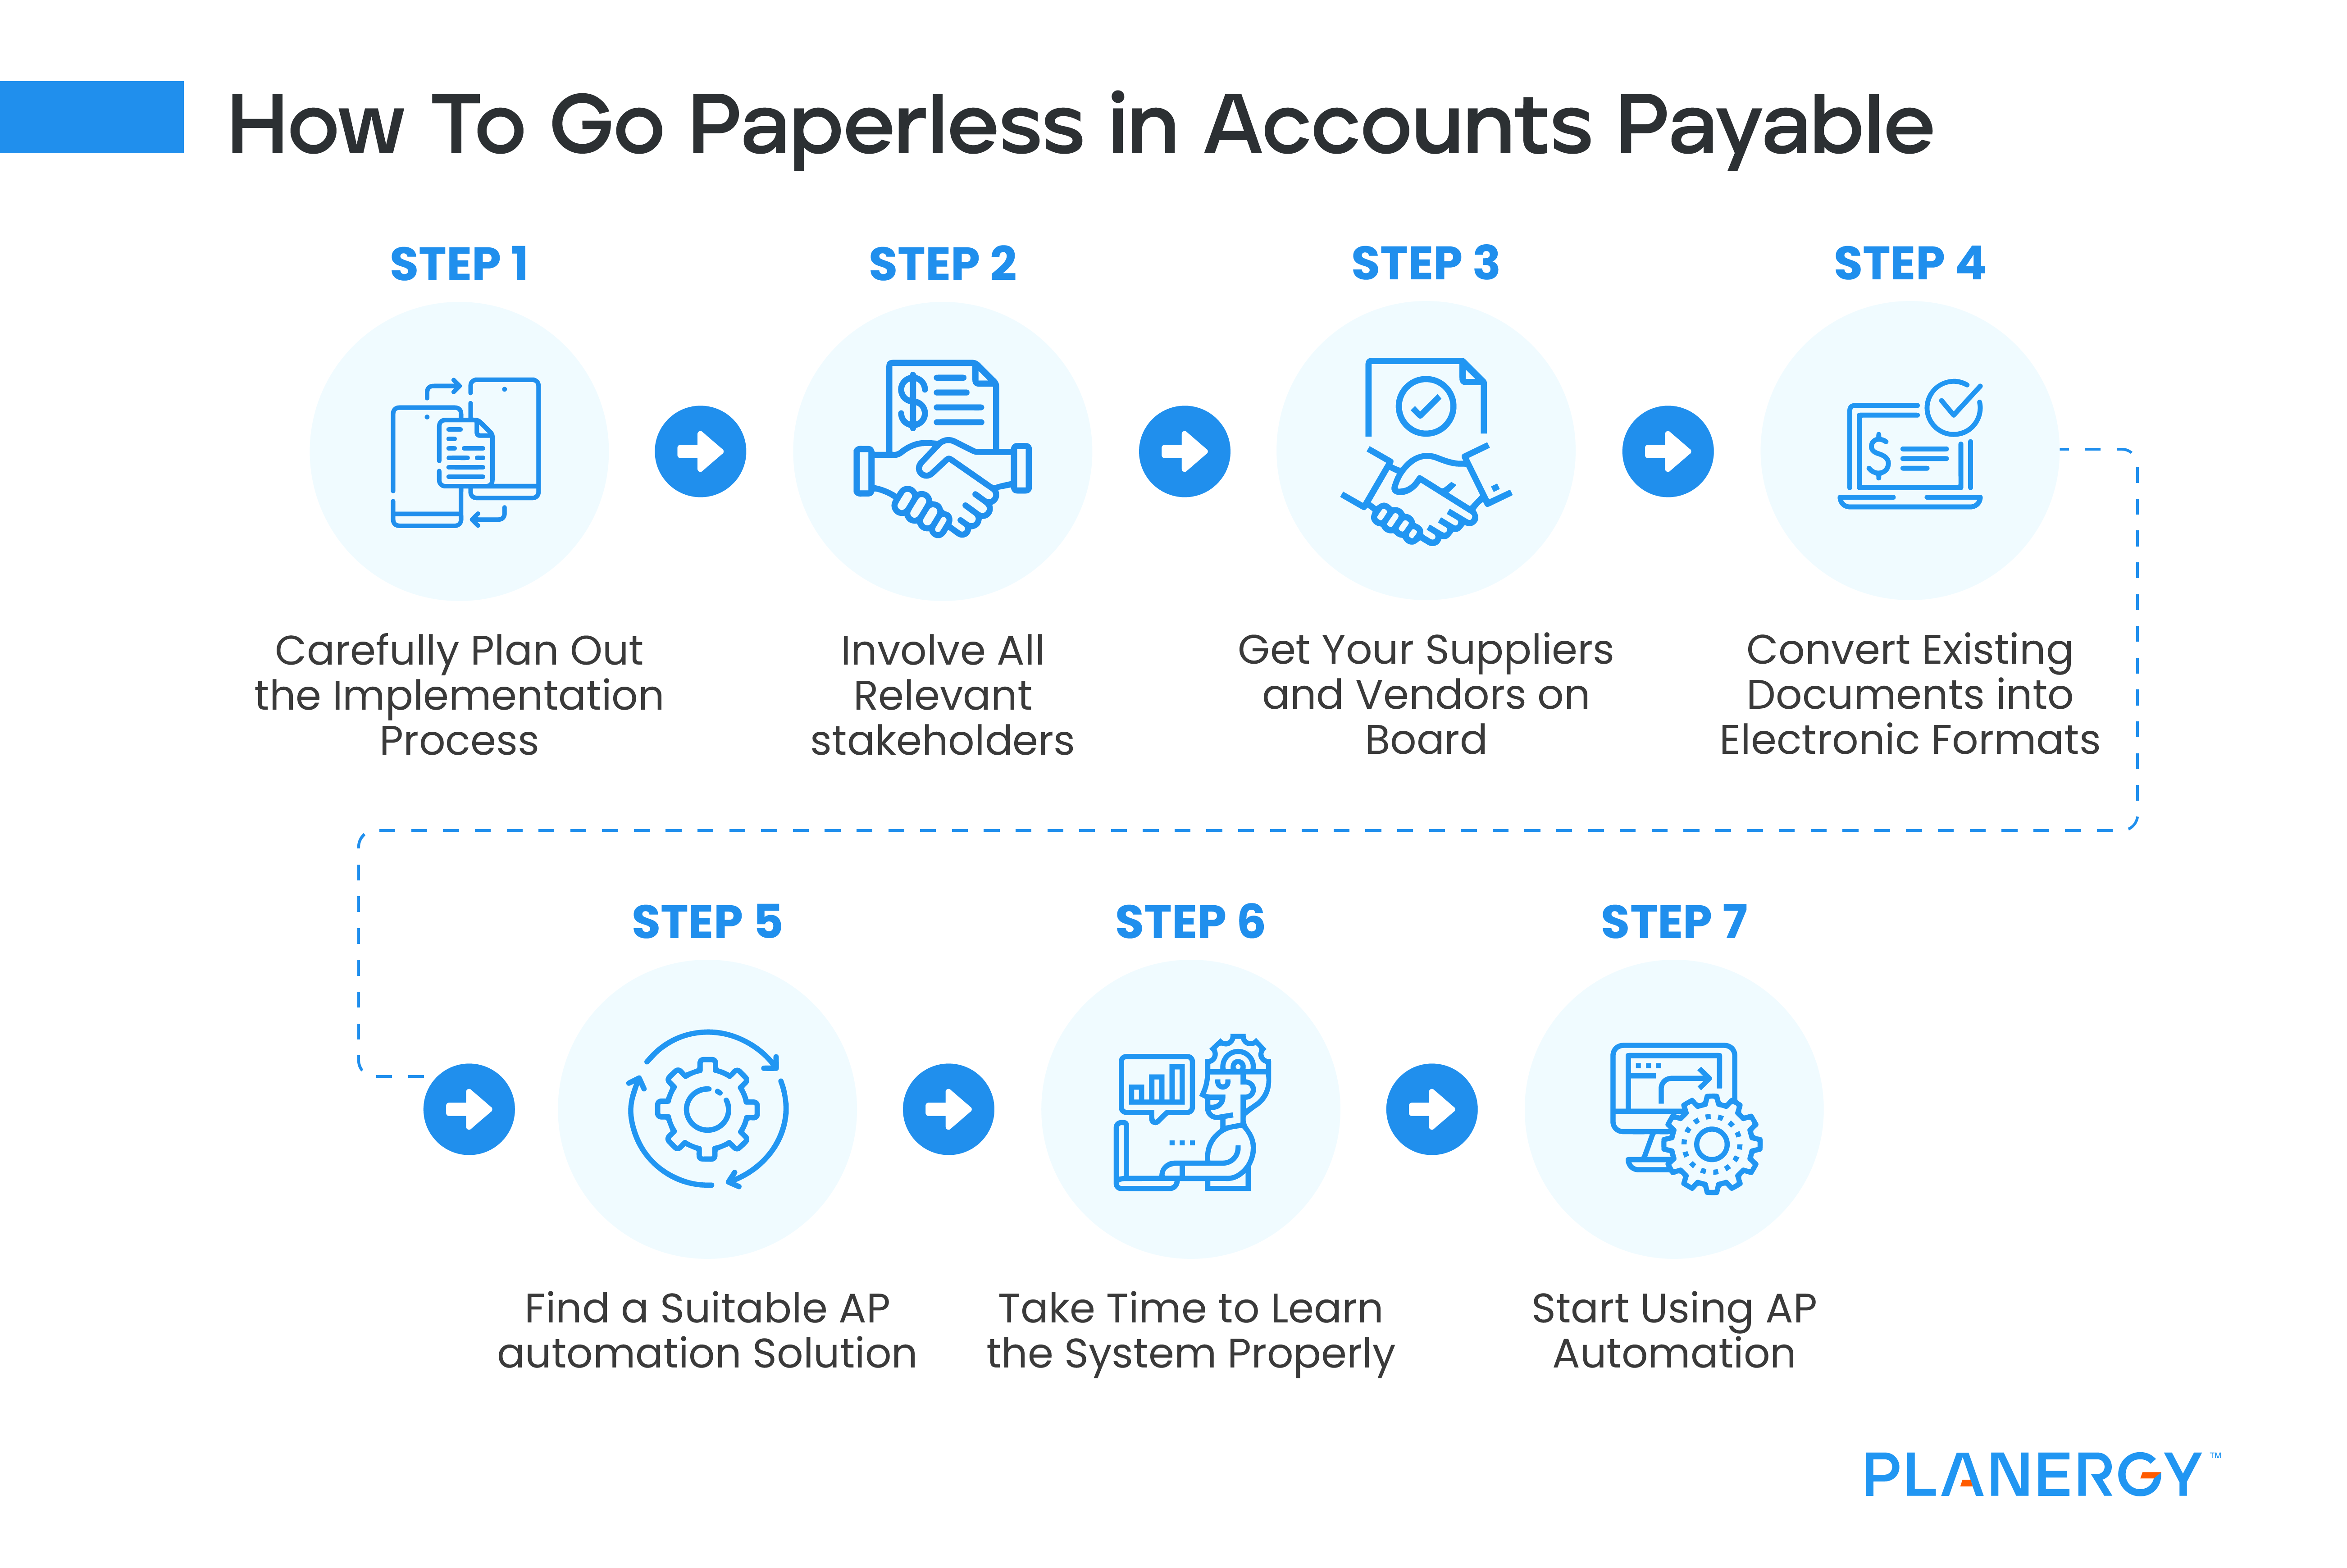 How to Go Paperless in Accounts Payable